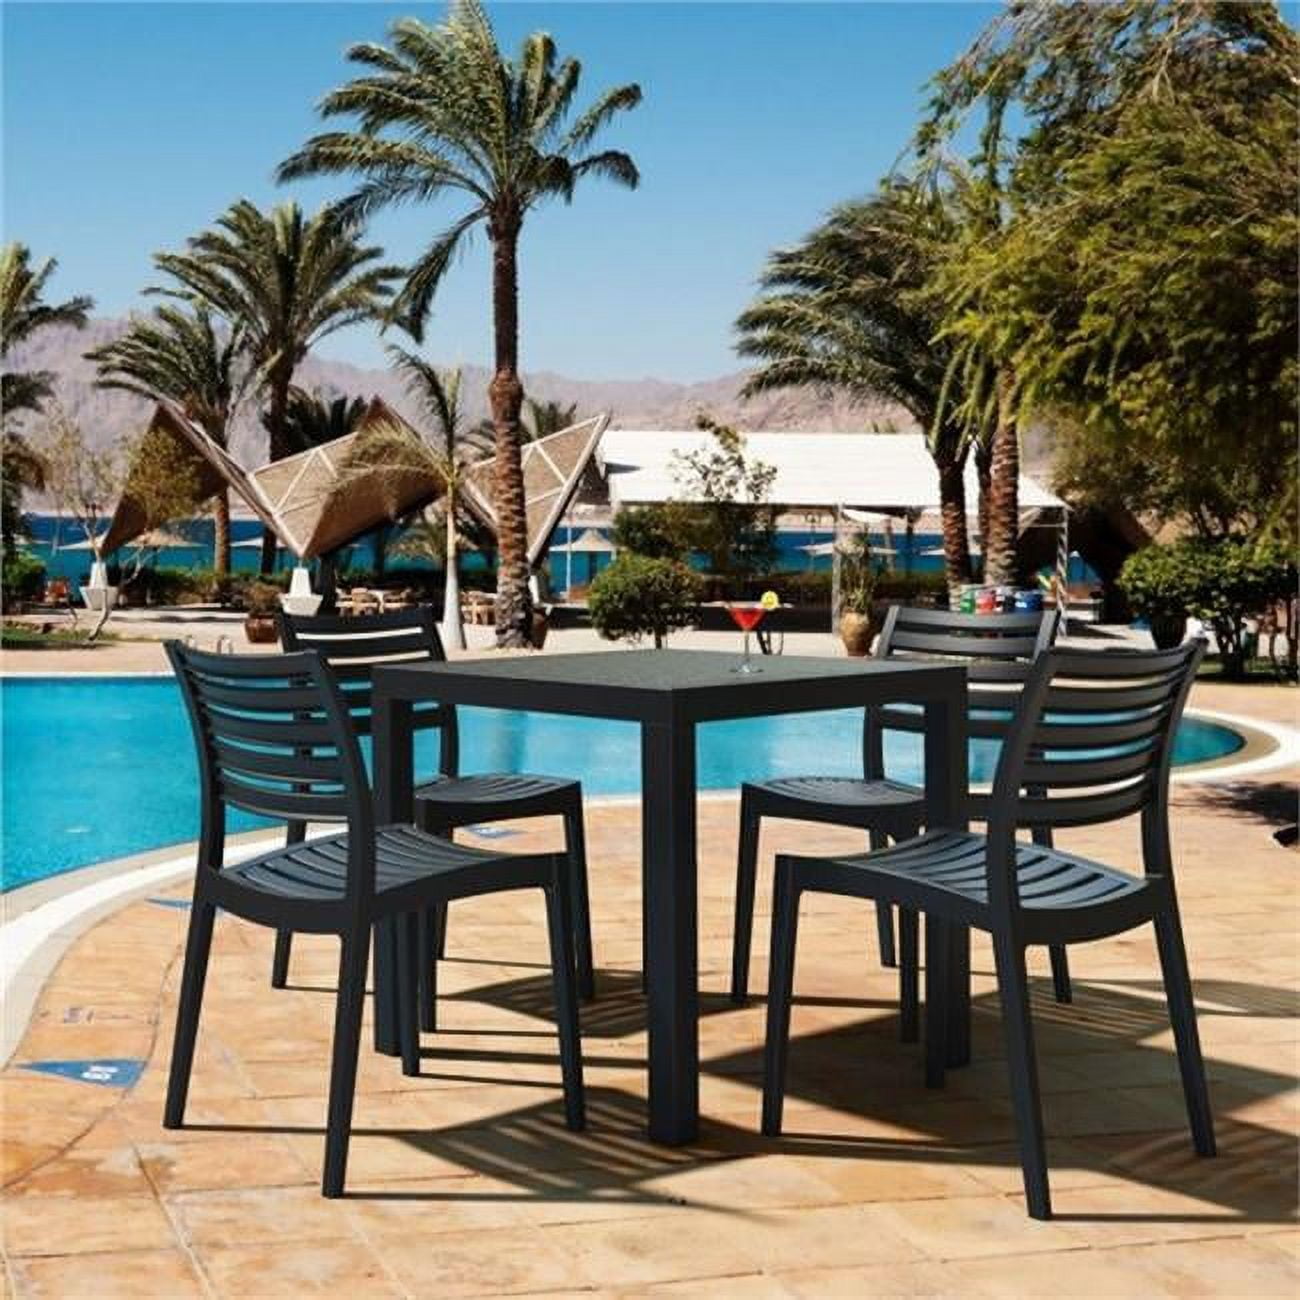 Ares Resin Square Dining Set With 4 Chairs, Black